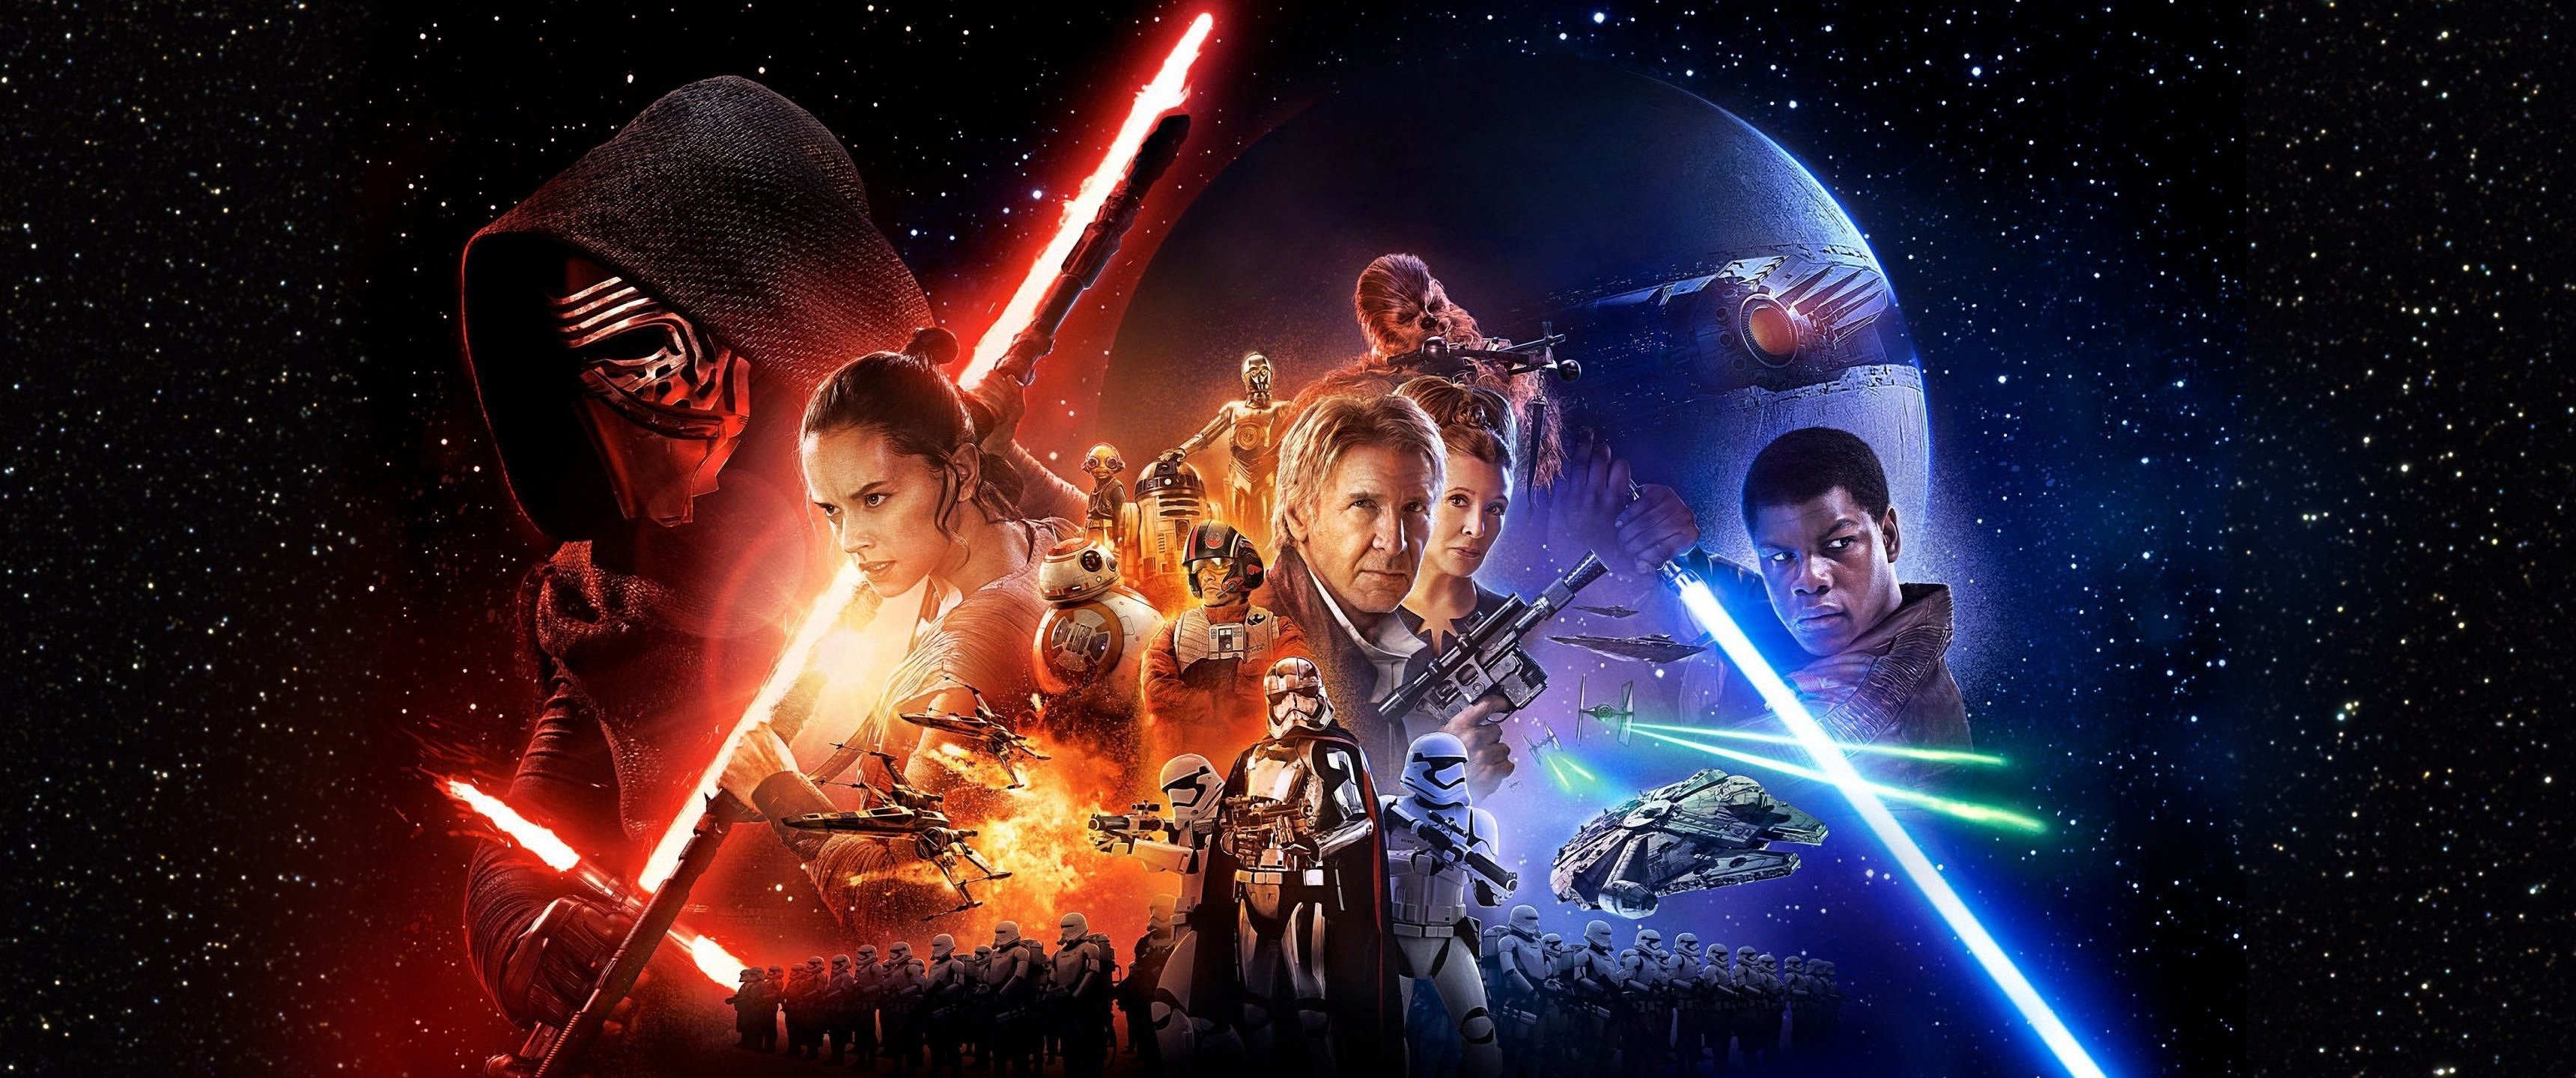 star wars the force awakens full movie download mp4